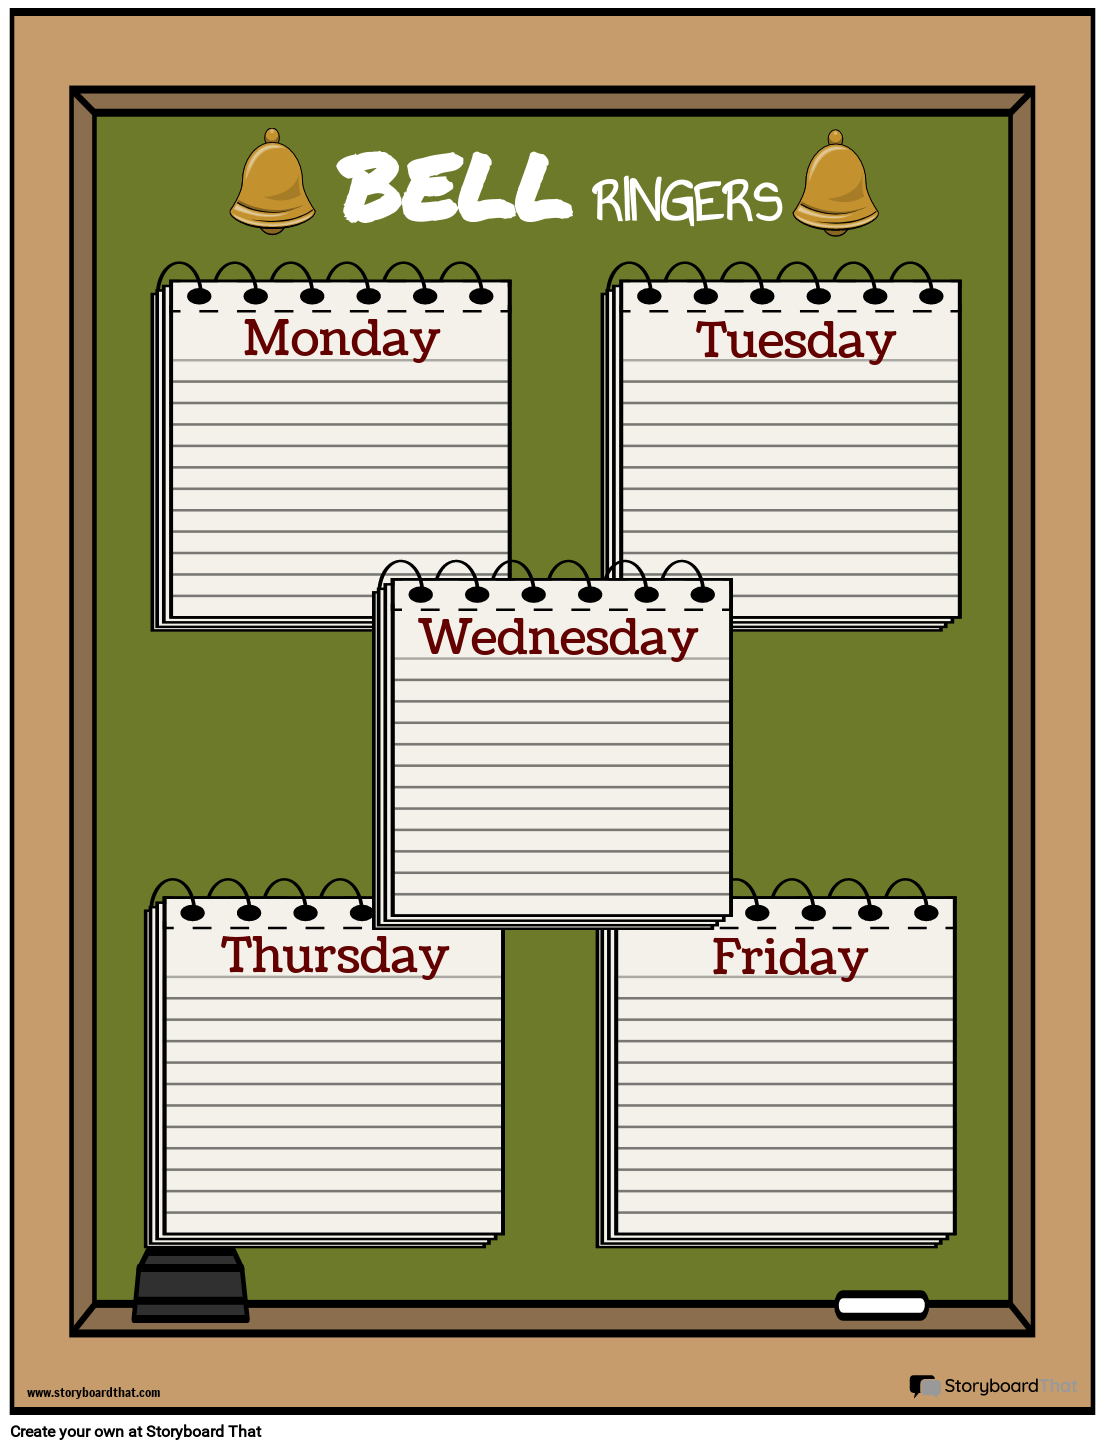 Free Printable Bell Ringers Templates StoryboardThat - Free Printable Bell Ringers